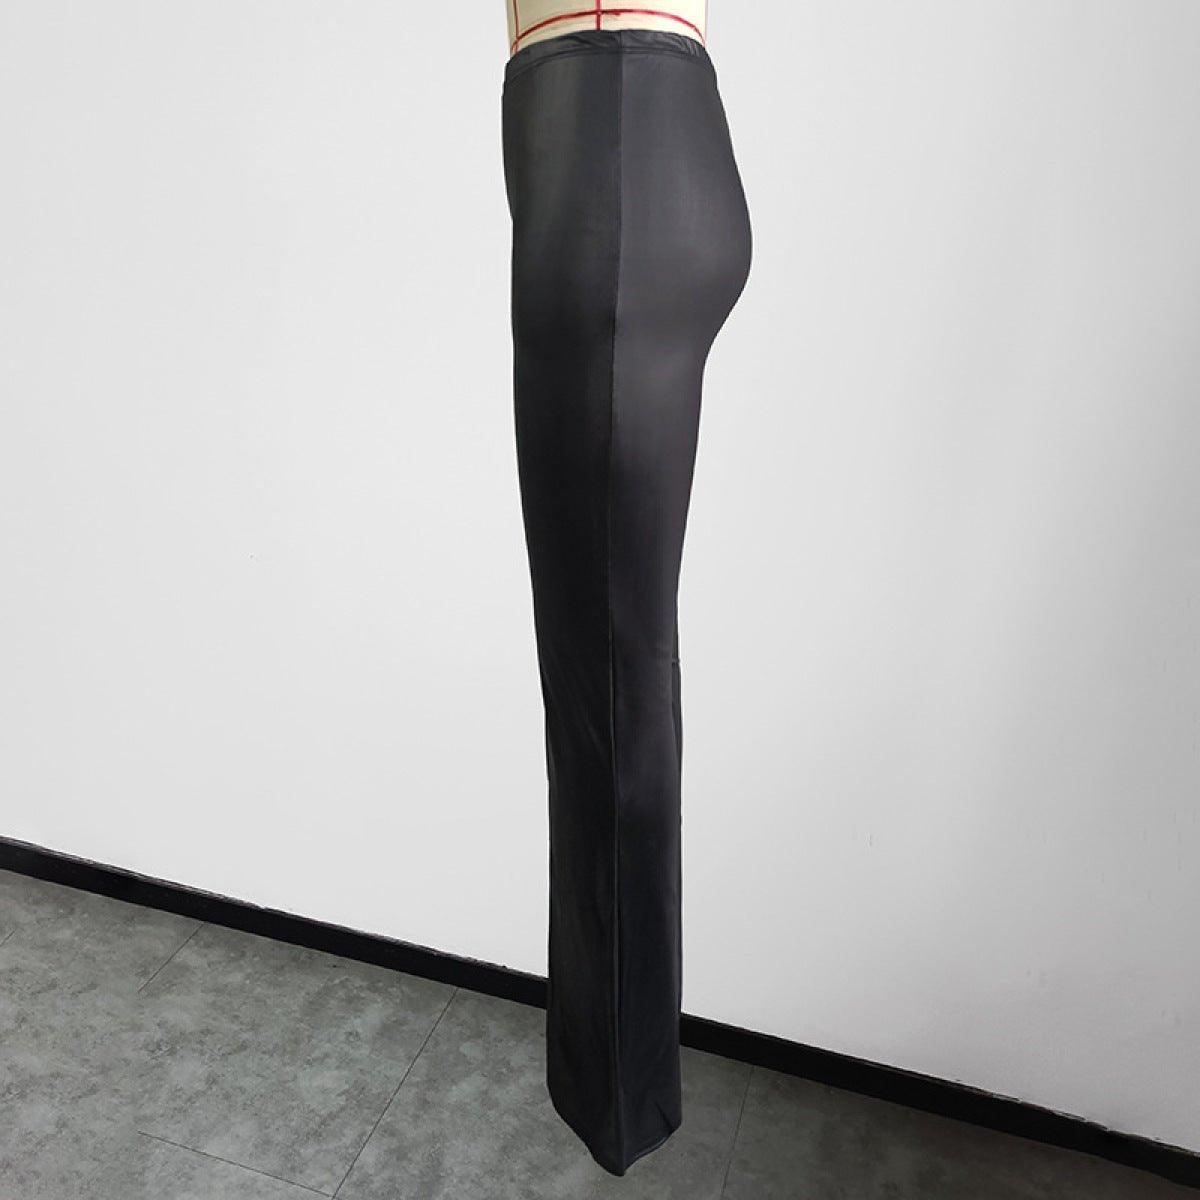 Black Faux Leather Flared Pant High Waist Sexy